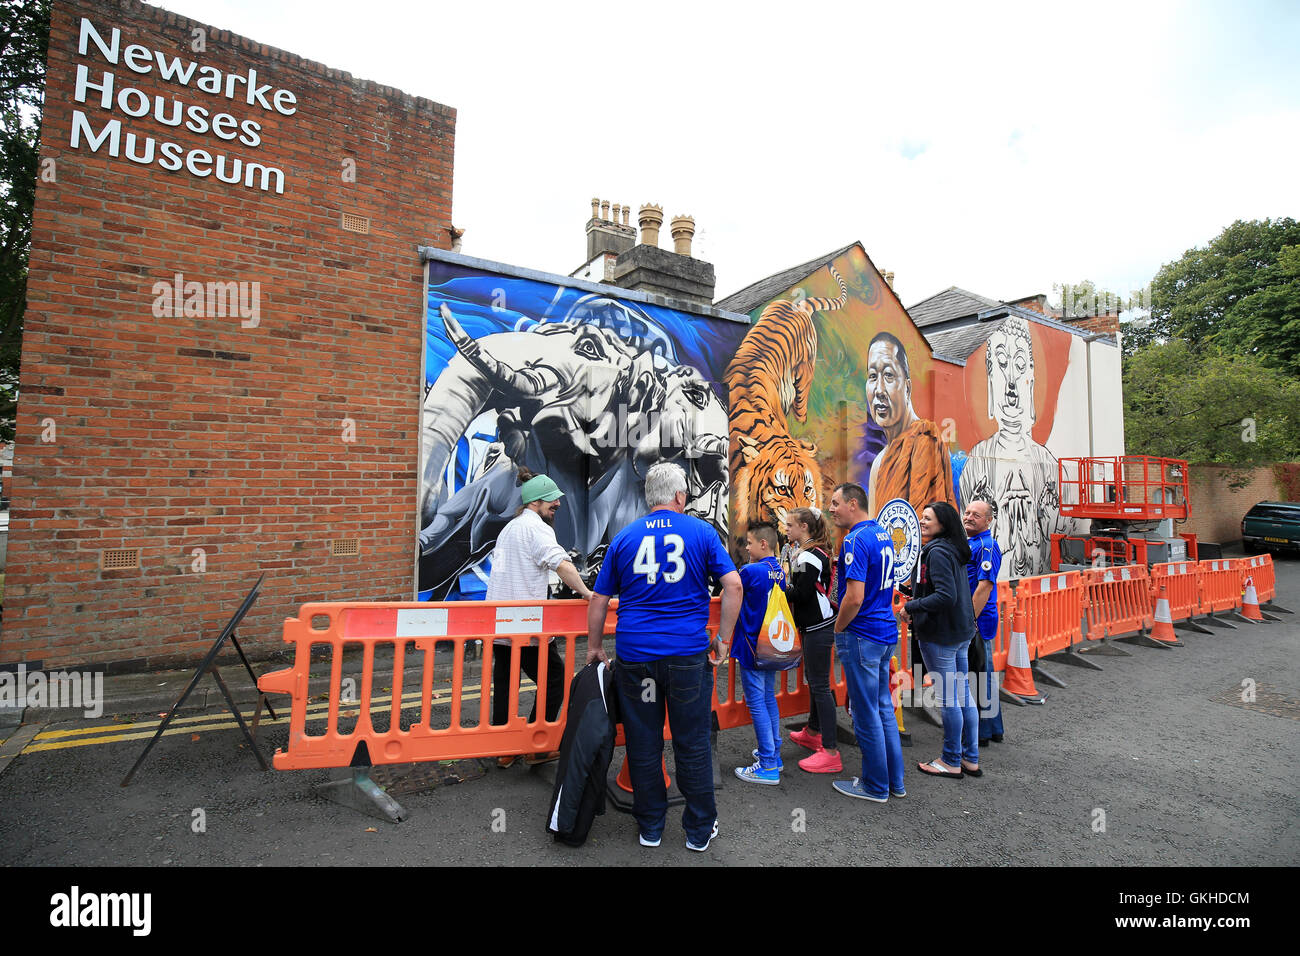 Leicester City fans watch artist Leigh Drummond work on a Leicester City mural at Newarke Houses Museum prior to the Premier League match at the King Power Stadium, Leicester. PRESS ASSOCIATION Photo. Picture date: Saturday August 20, 2016. See PA story SOCCER Leicester. Photo credit should read: PA Wire. RESTRICTIONS: No use with unauthorised audio, video, data, fixture lists, club/league logos or 'live' services. Online in-match use limited to 75 images, no video emulation. No use in betting, games or single club/league/player publications. Stock Photo